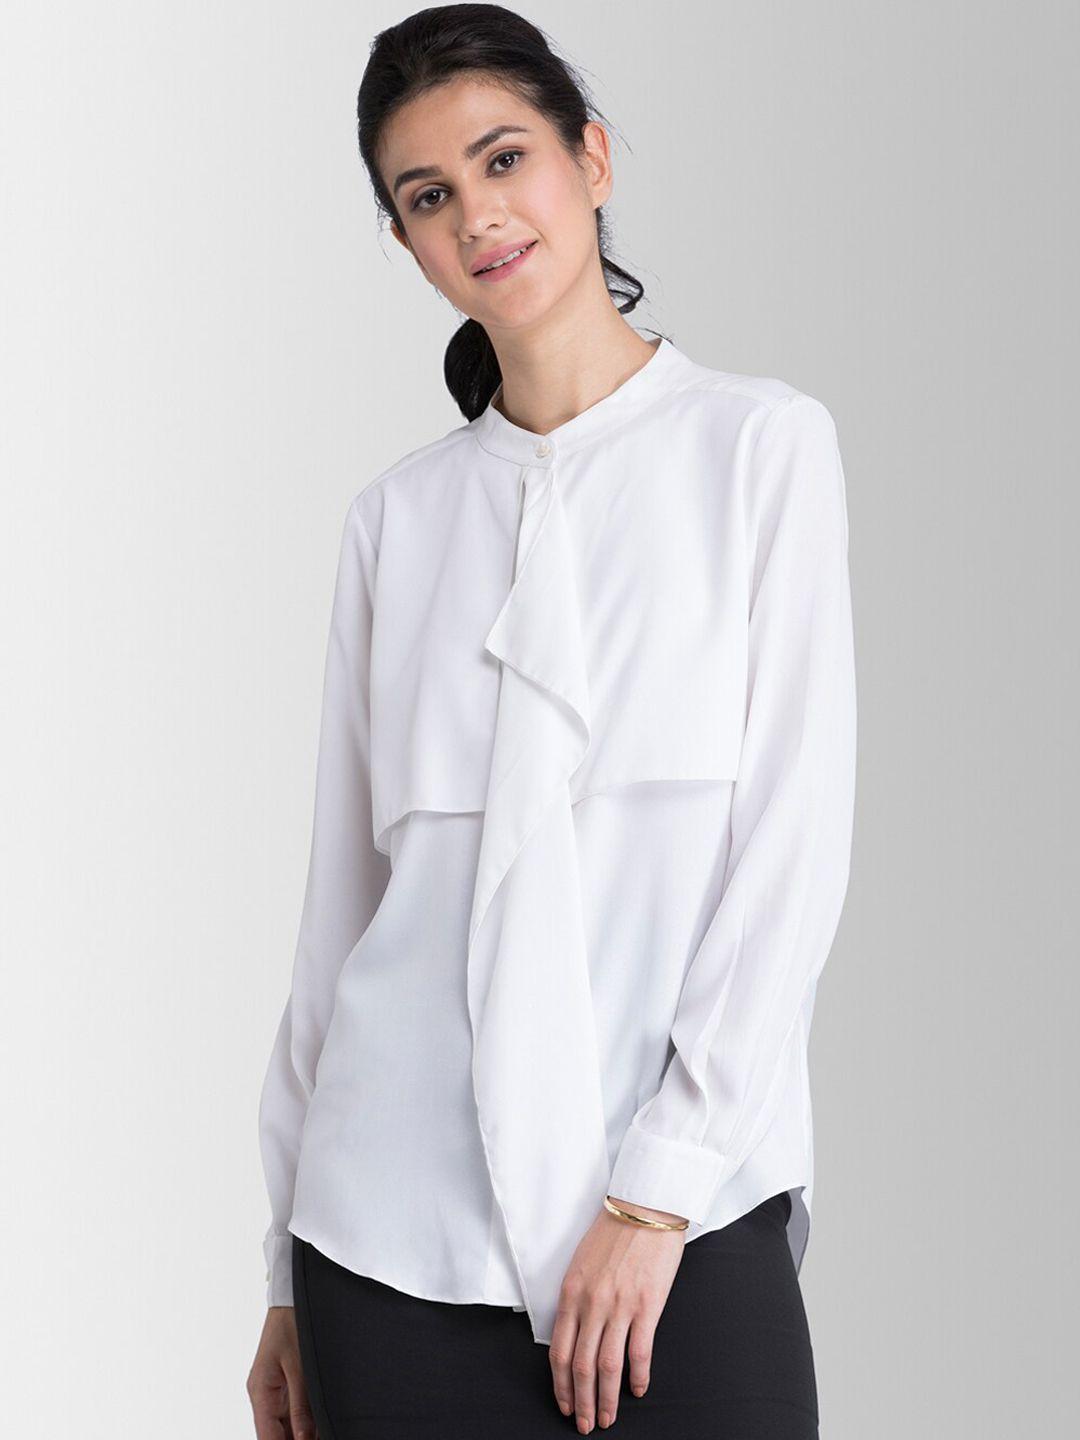 fablestreet women white solid shirt style top